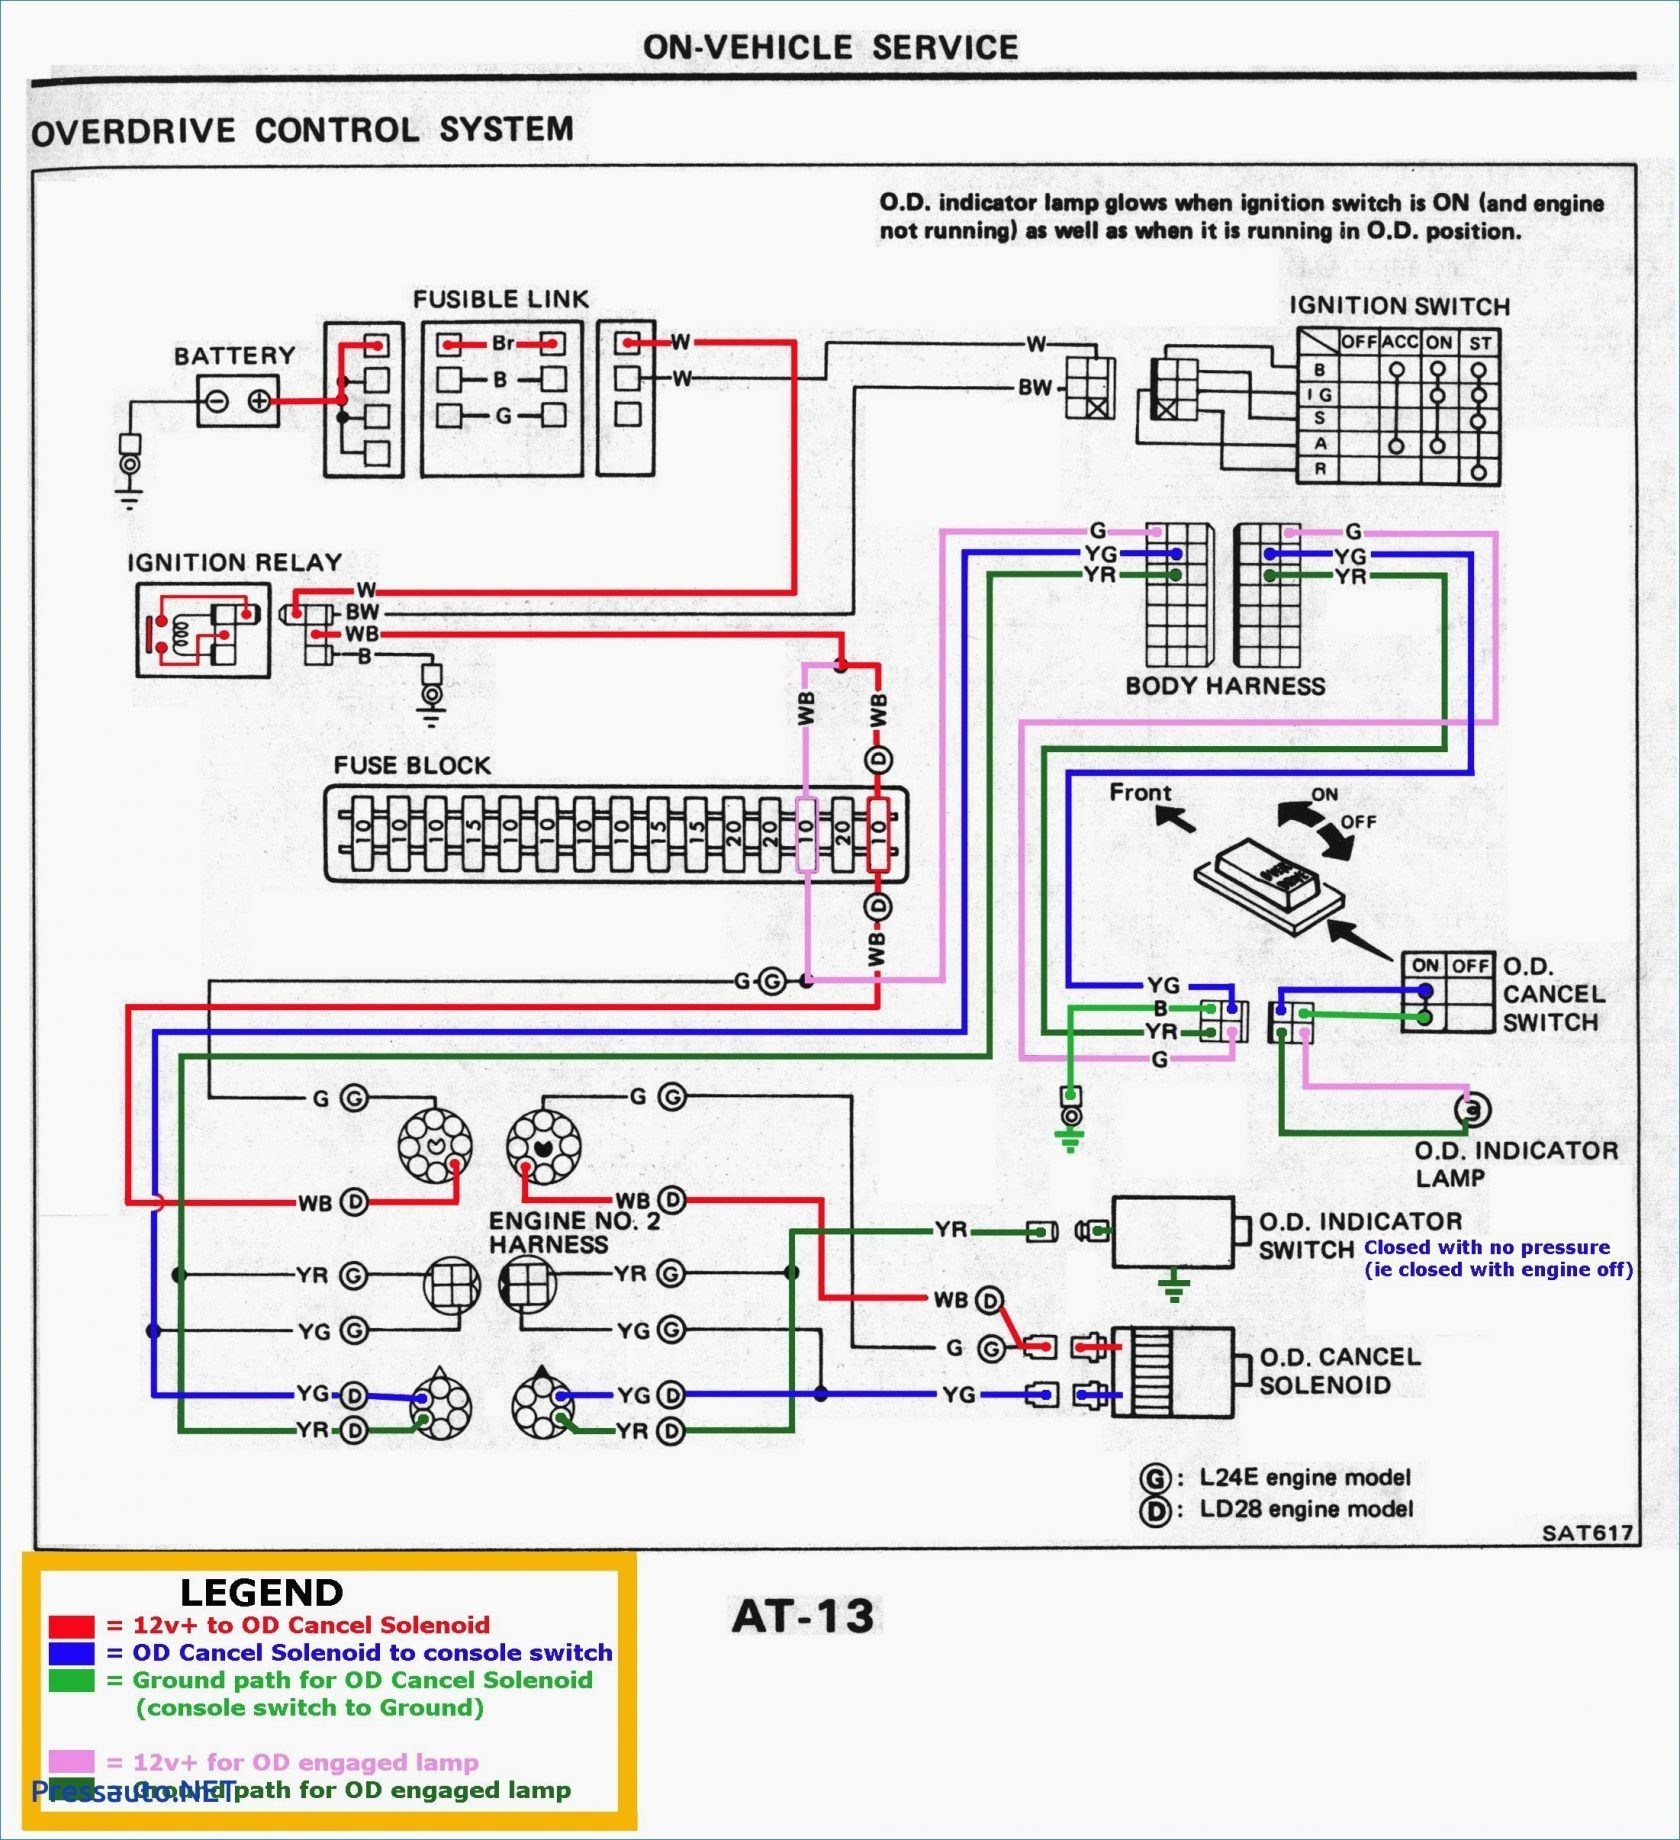 2009 toyota Camry Engine Diagram Wiring Harness for 1993 toyota Pickup Wiring Diagram Datasource Of 2009 toyota Camry Engine Diagram